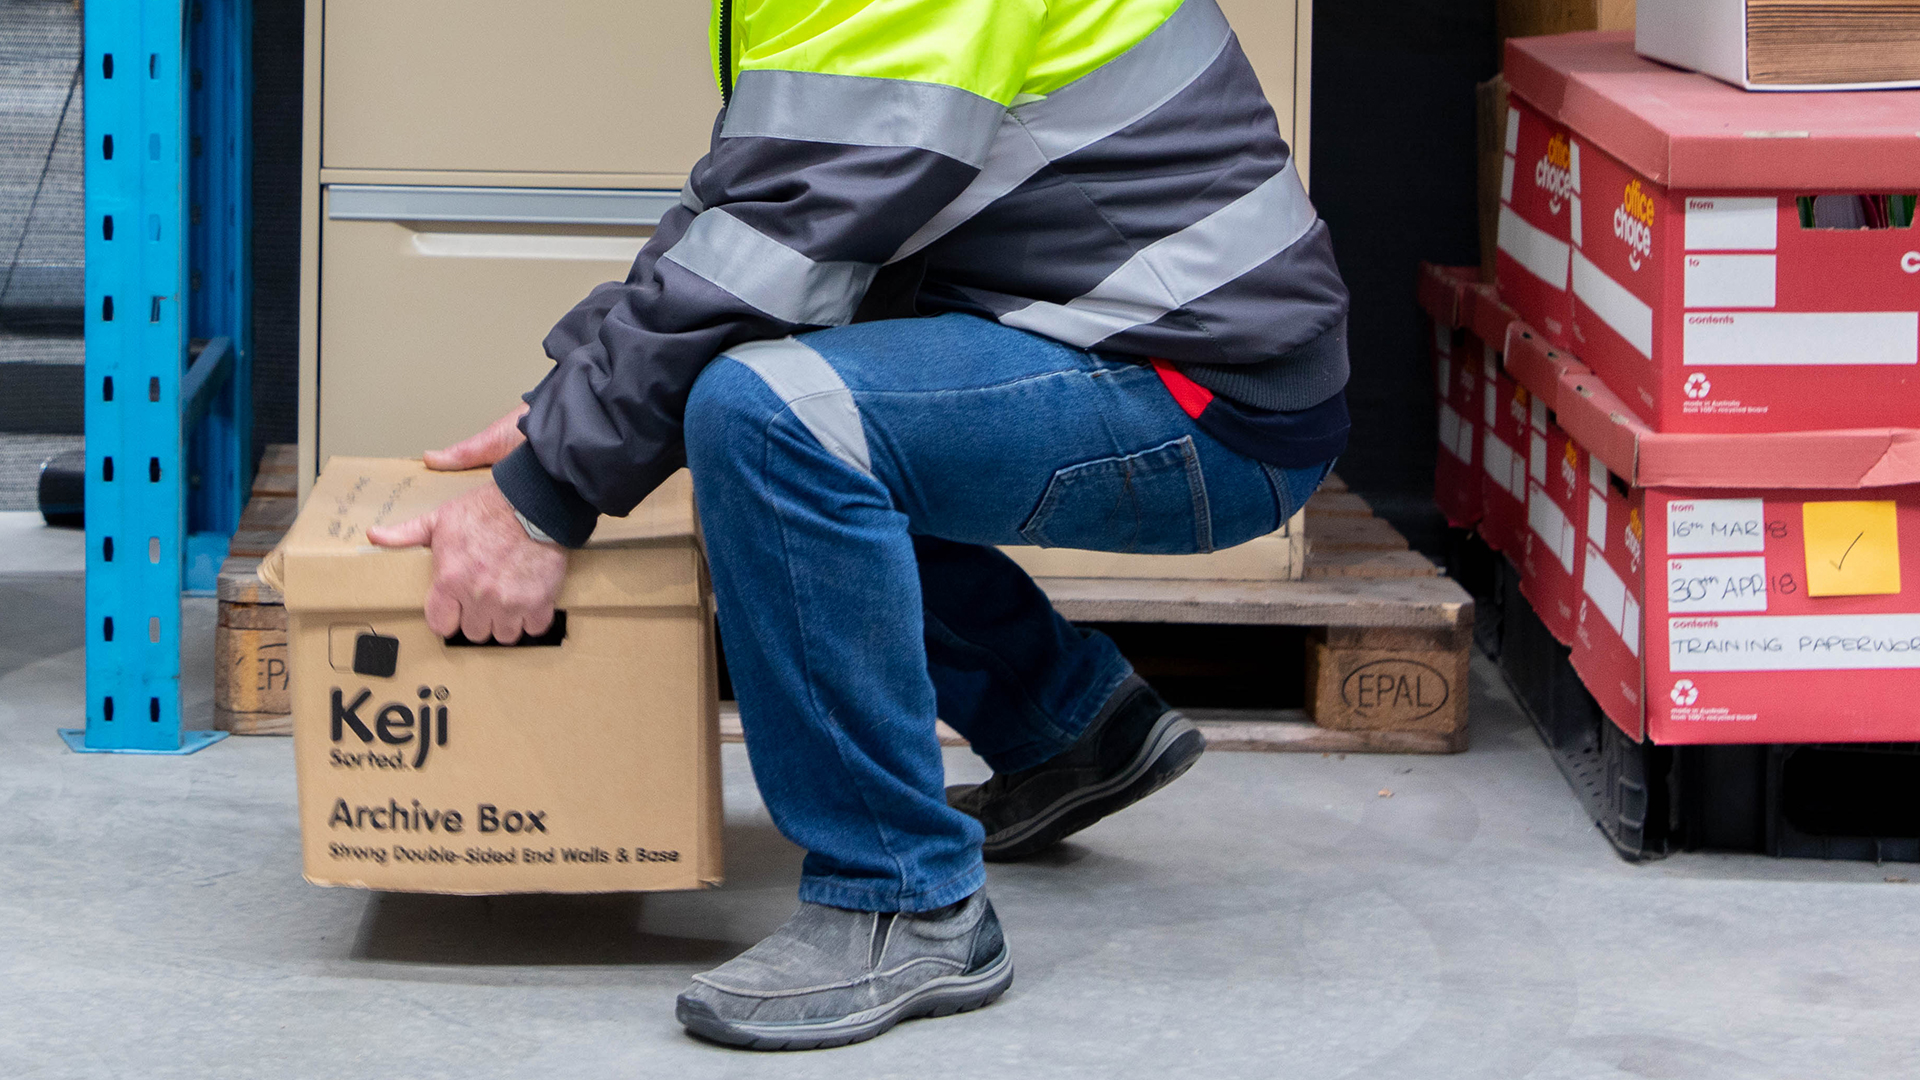 Participant lifting an archive box using safe manual handling techniques.